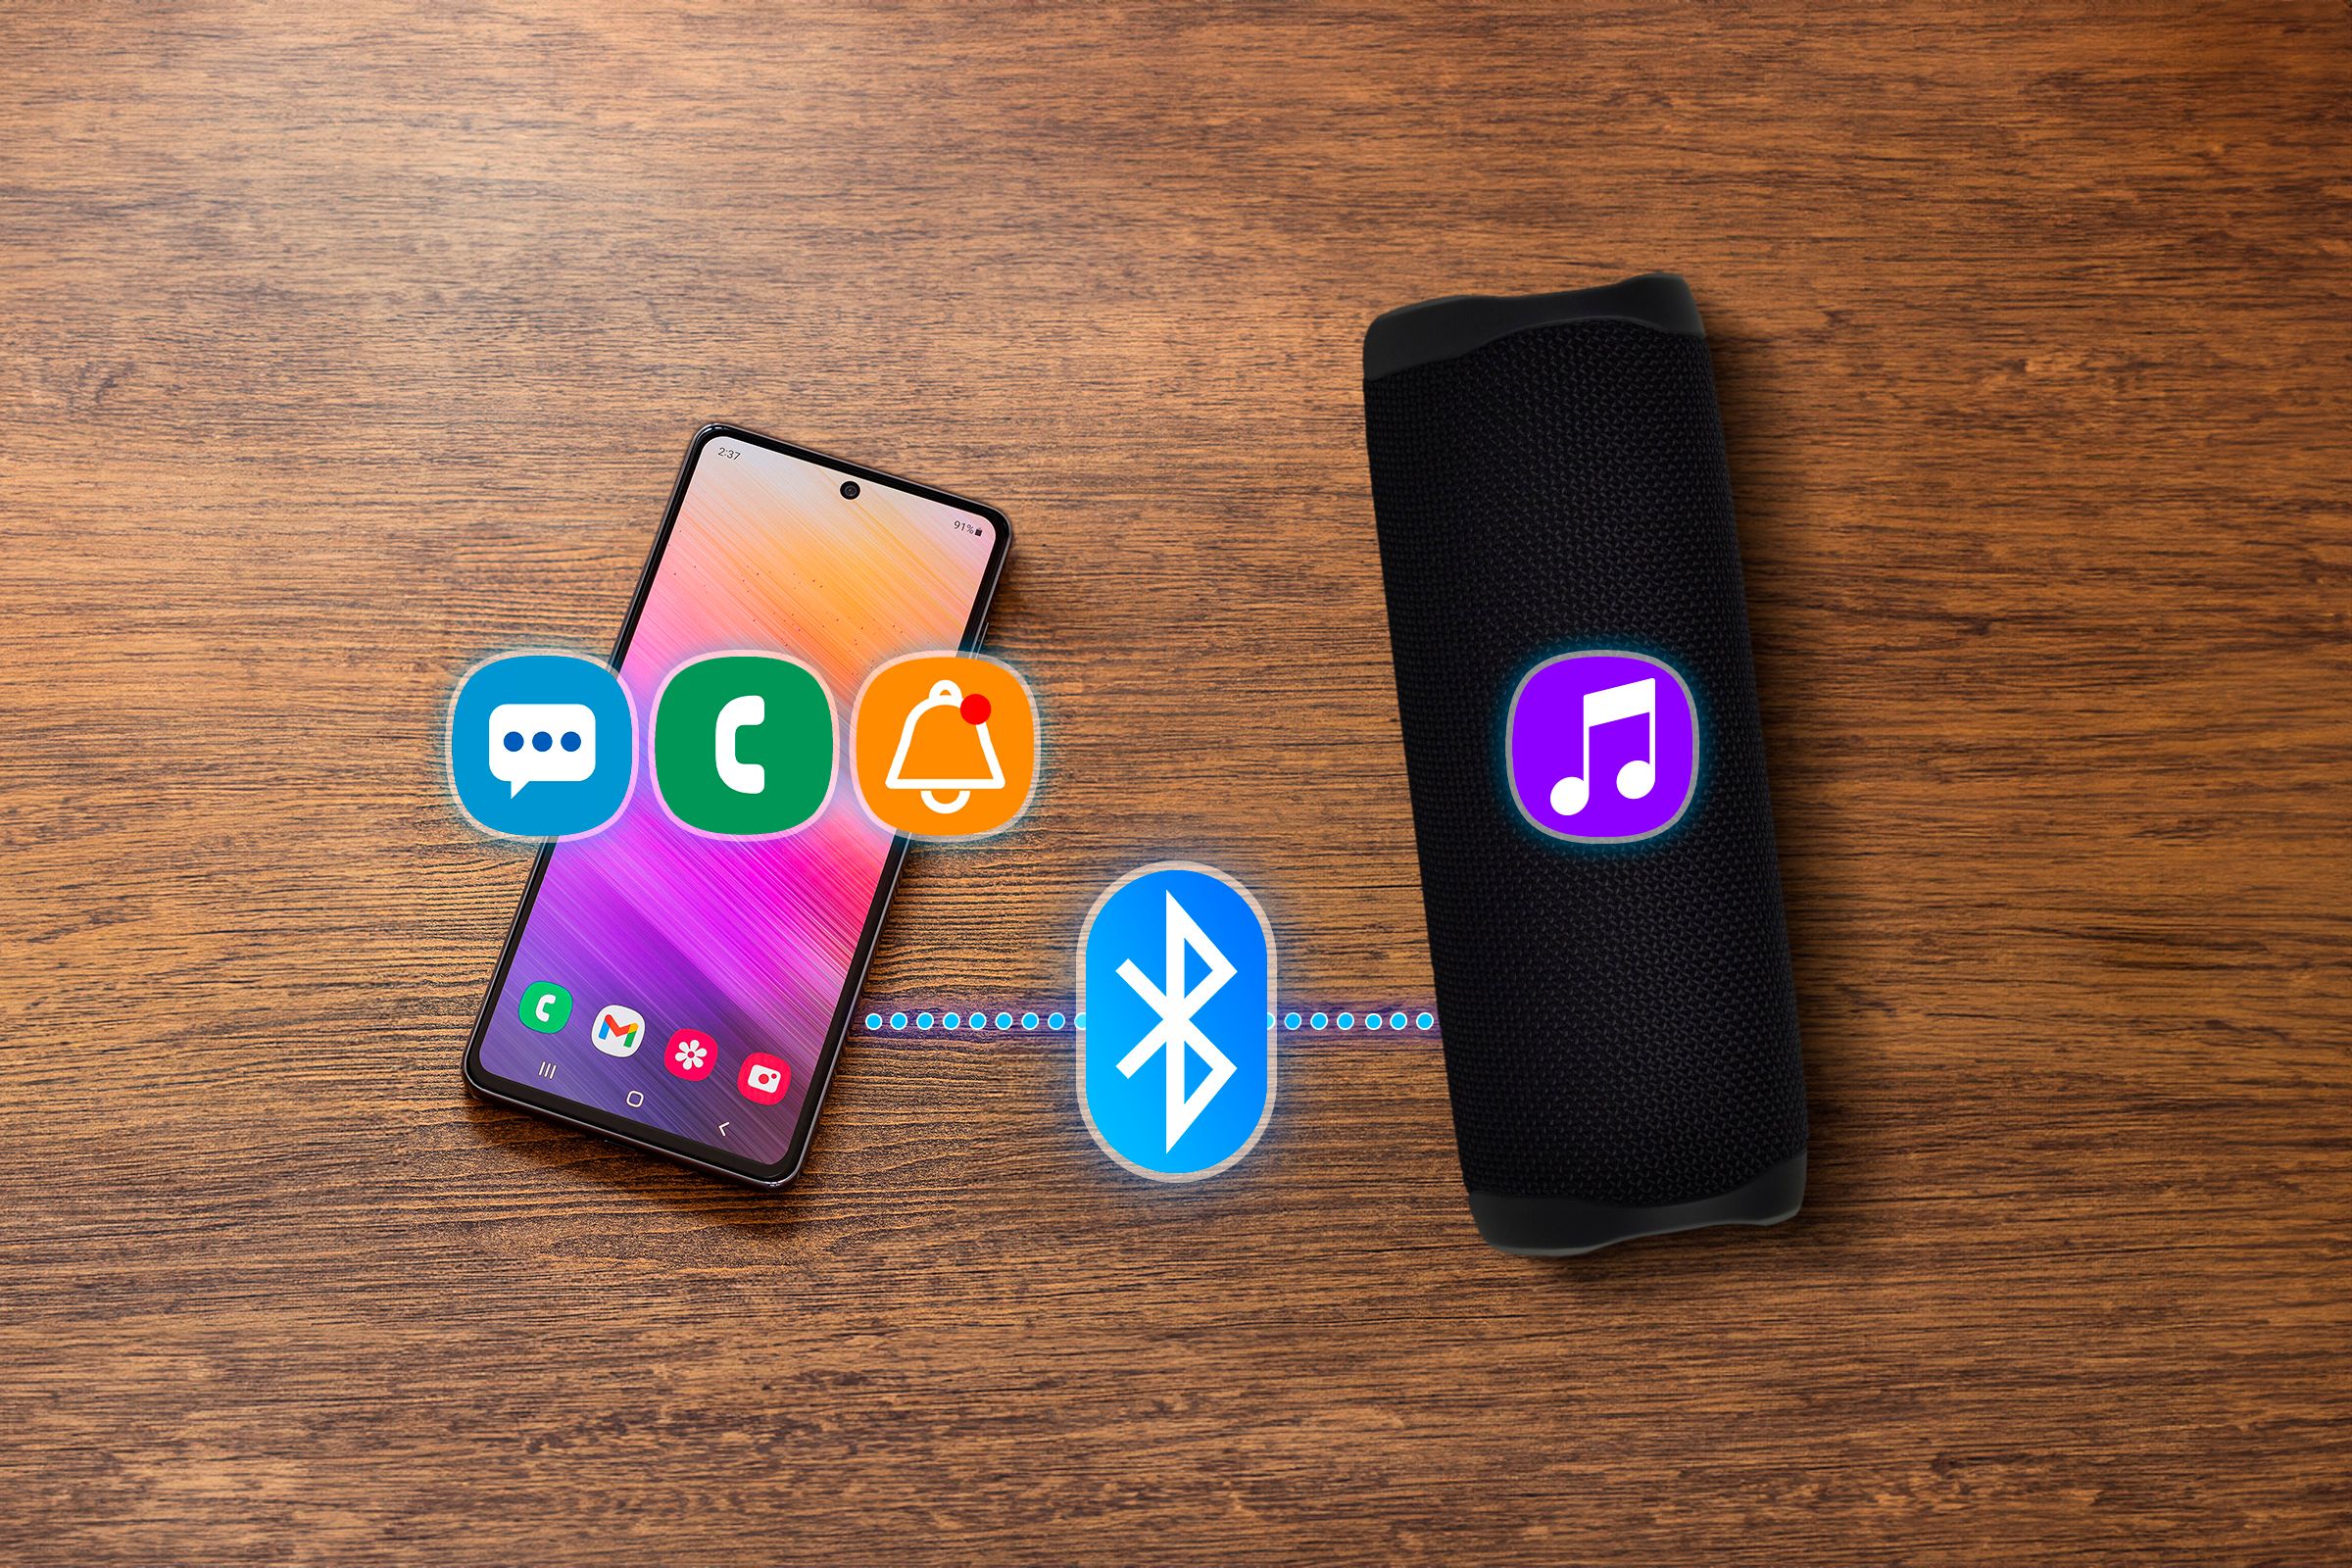 A Samsung Galaxy phone on the left side and a Bluetooth speaker on the right side with a Bluetooth icon in the center, representing the connection between the two devices.